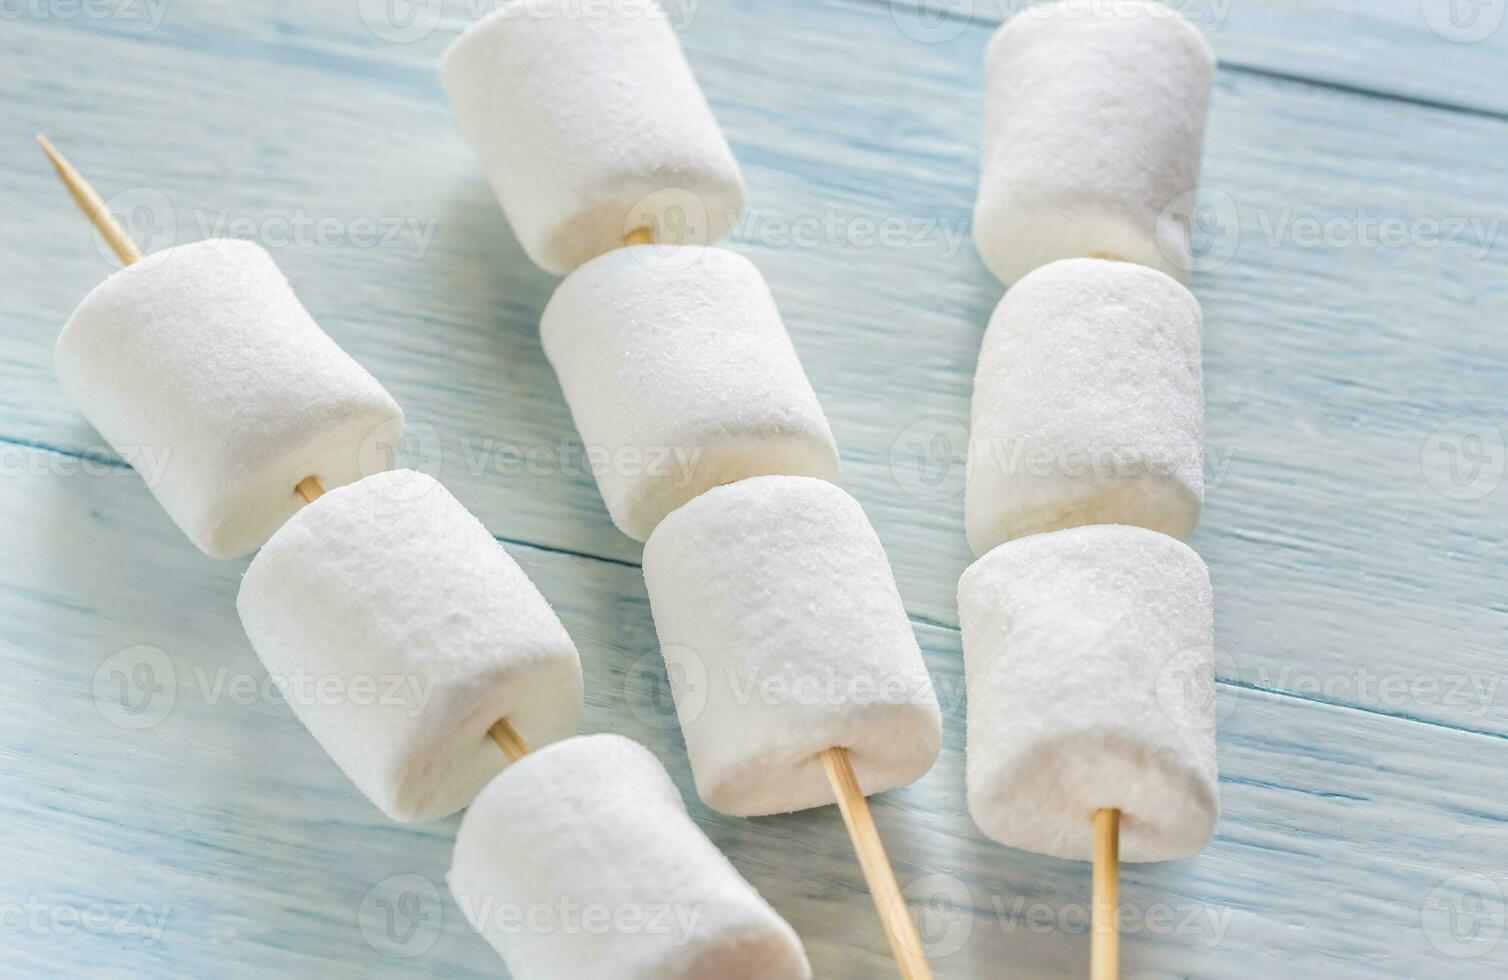 Marshmallow skewers on the wooden background photo